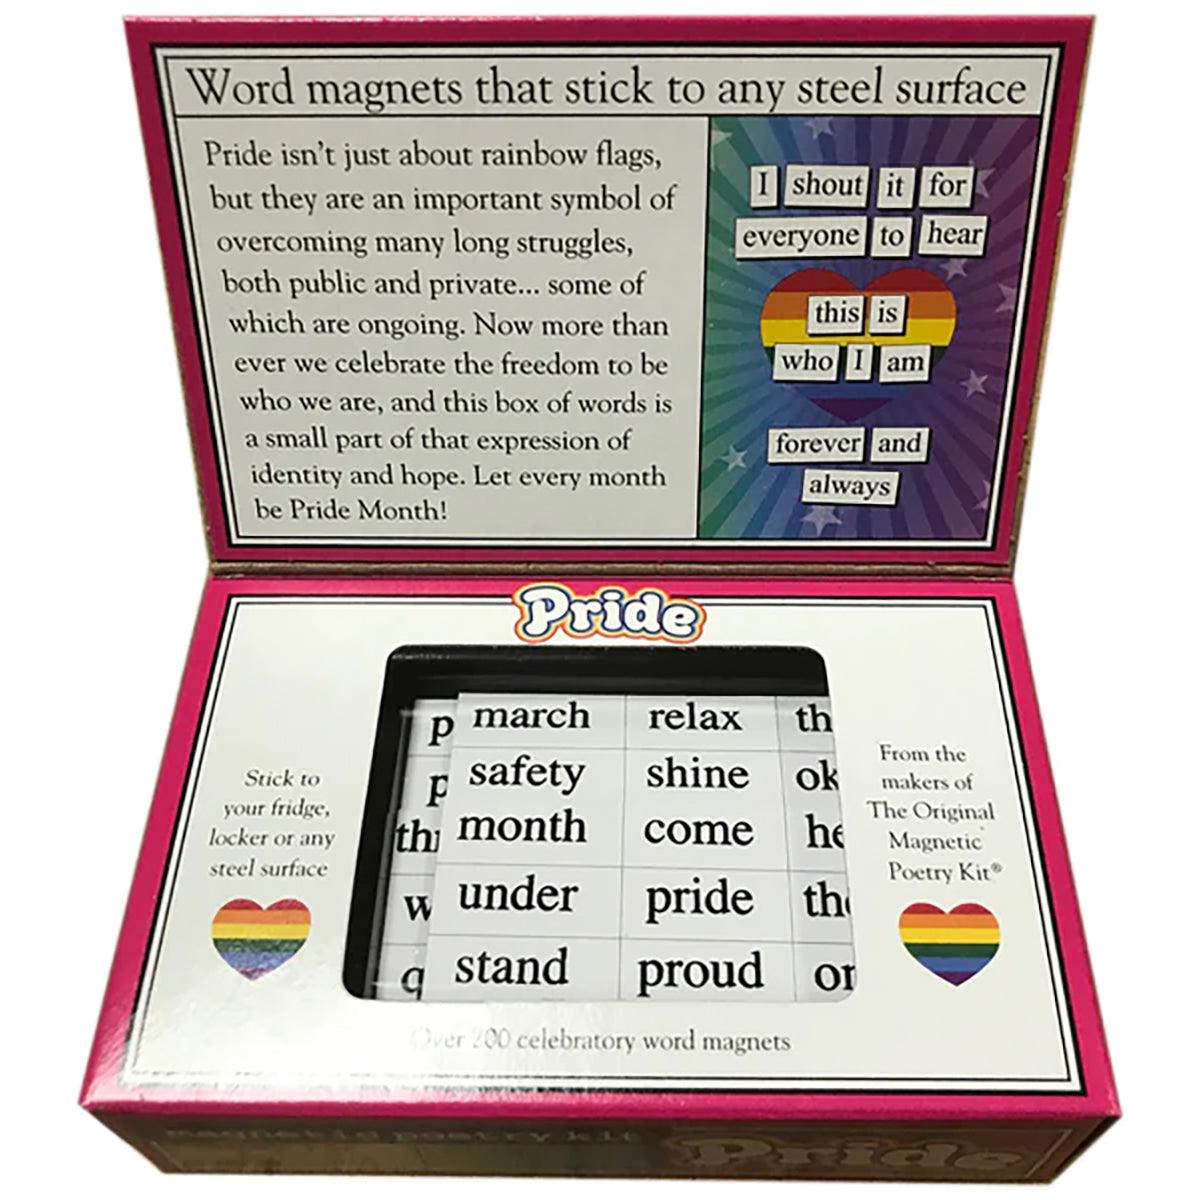 Magnetic Poetry Kit: Pride Edition - shop enby